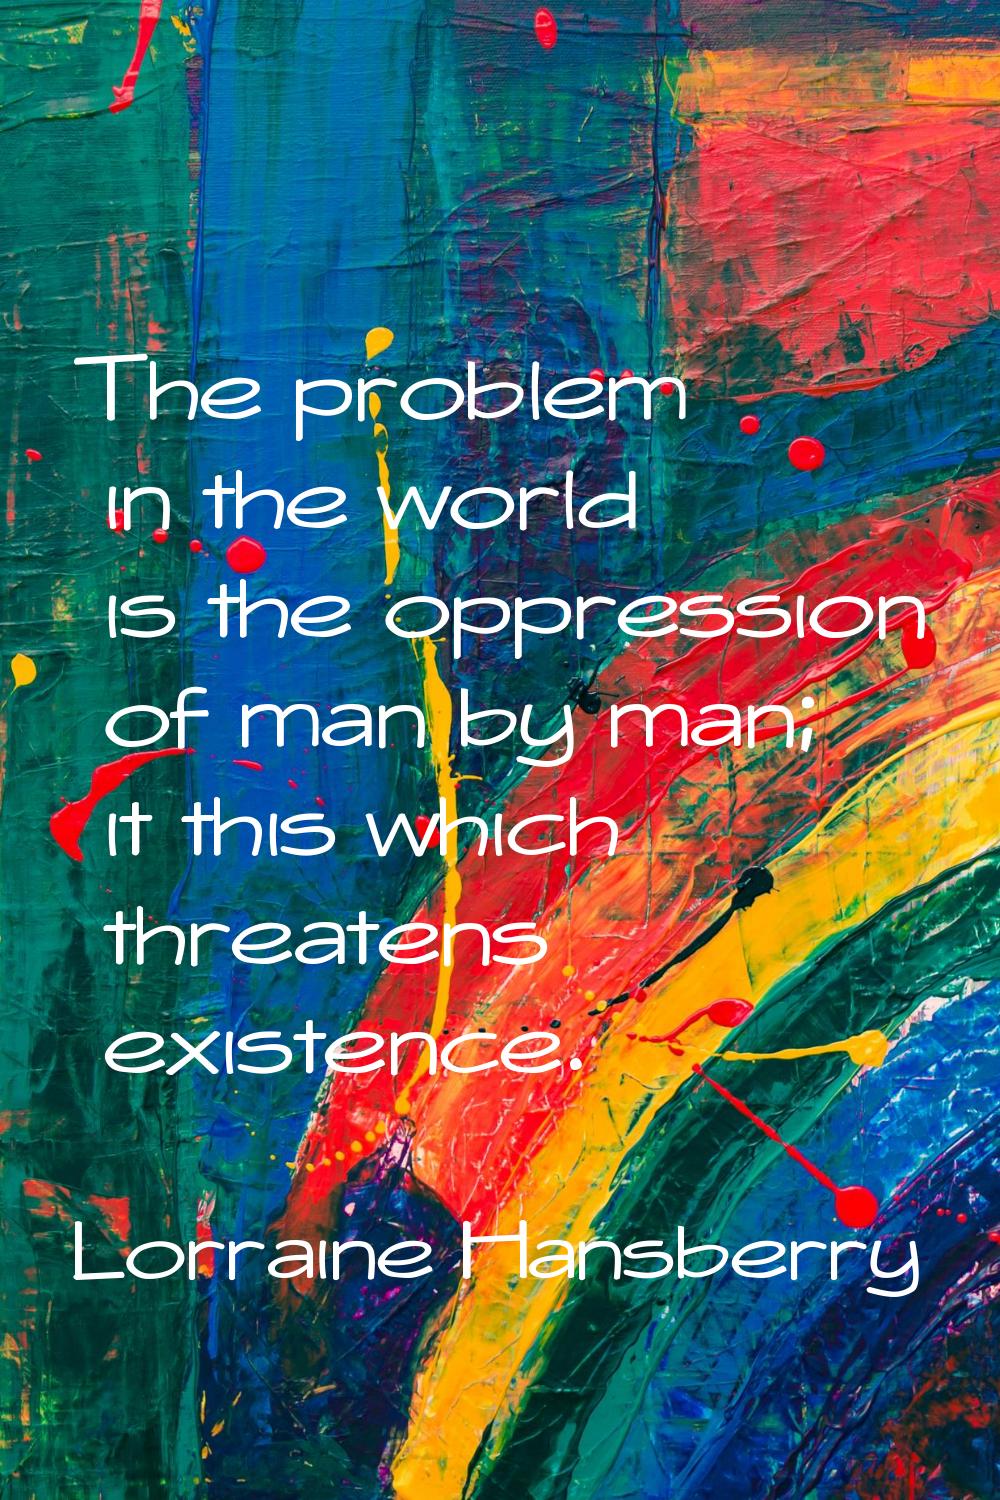 The problem in the world is the oppression of man by man; it this which threatens existence.